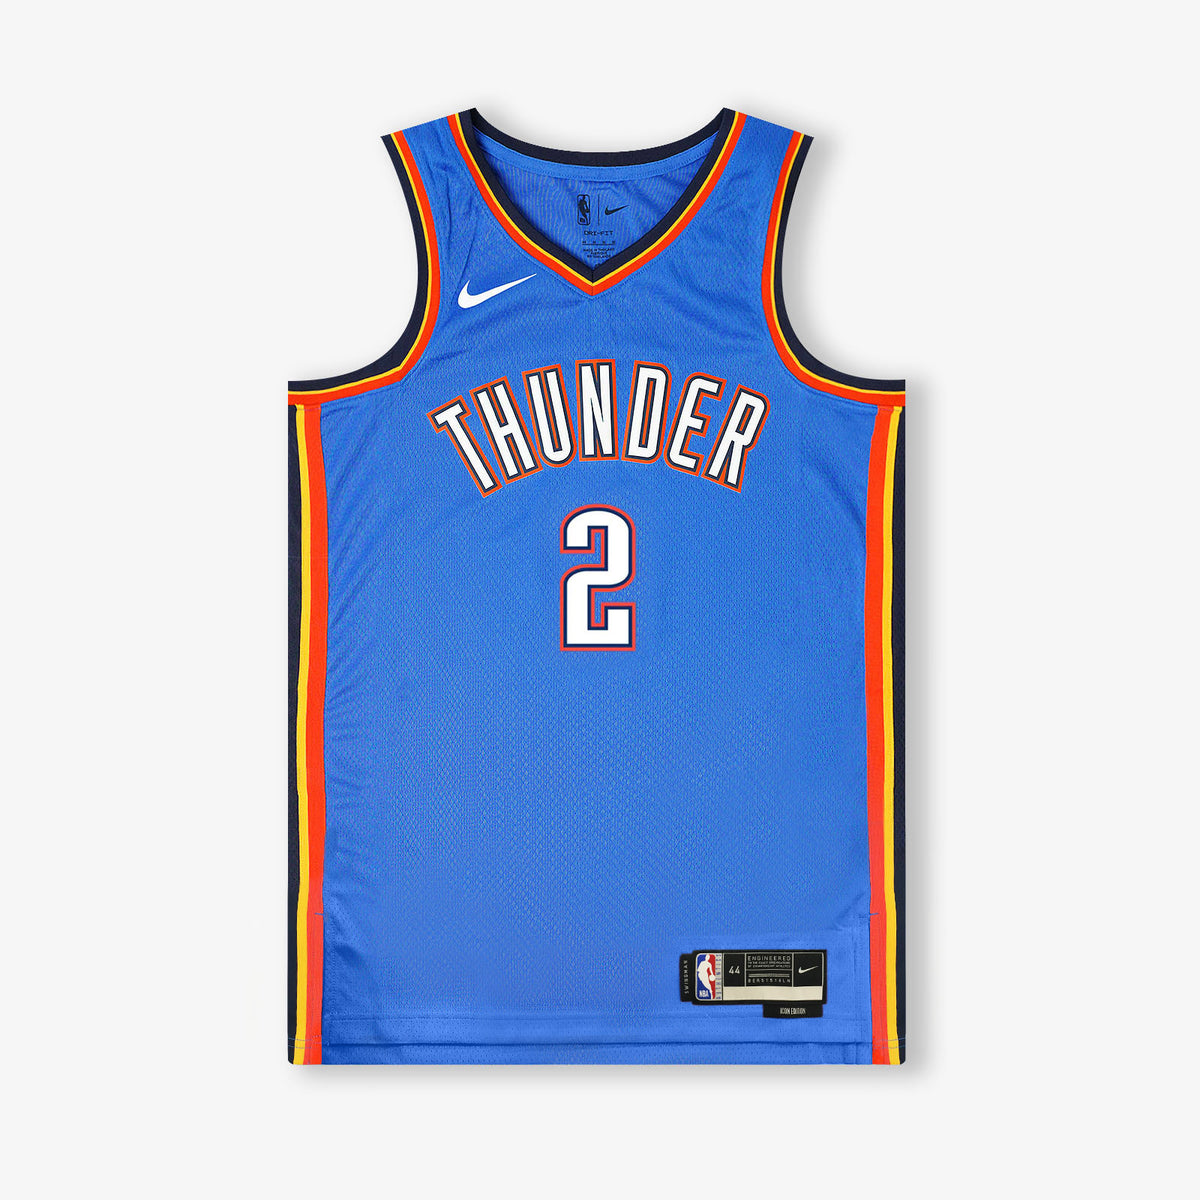 Shai Gilgeous-Alexander Oklahoma City Thunder Jersey for Sale in